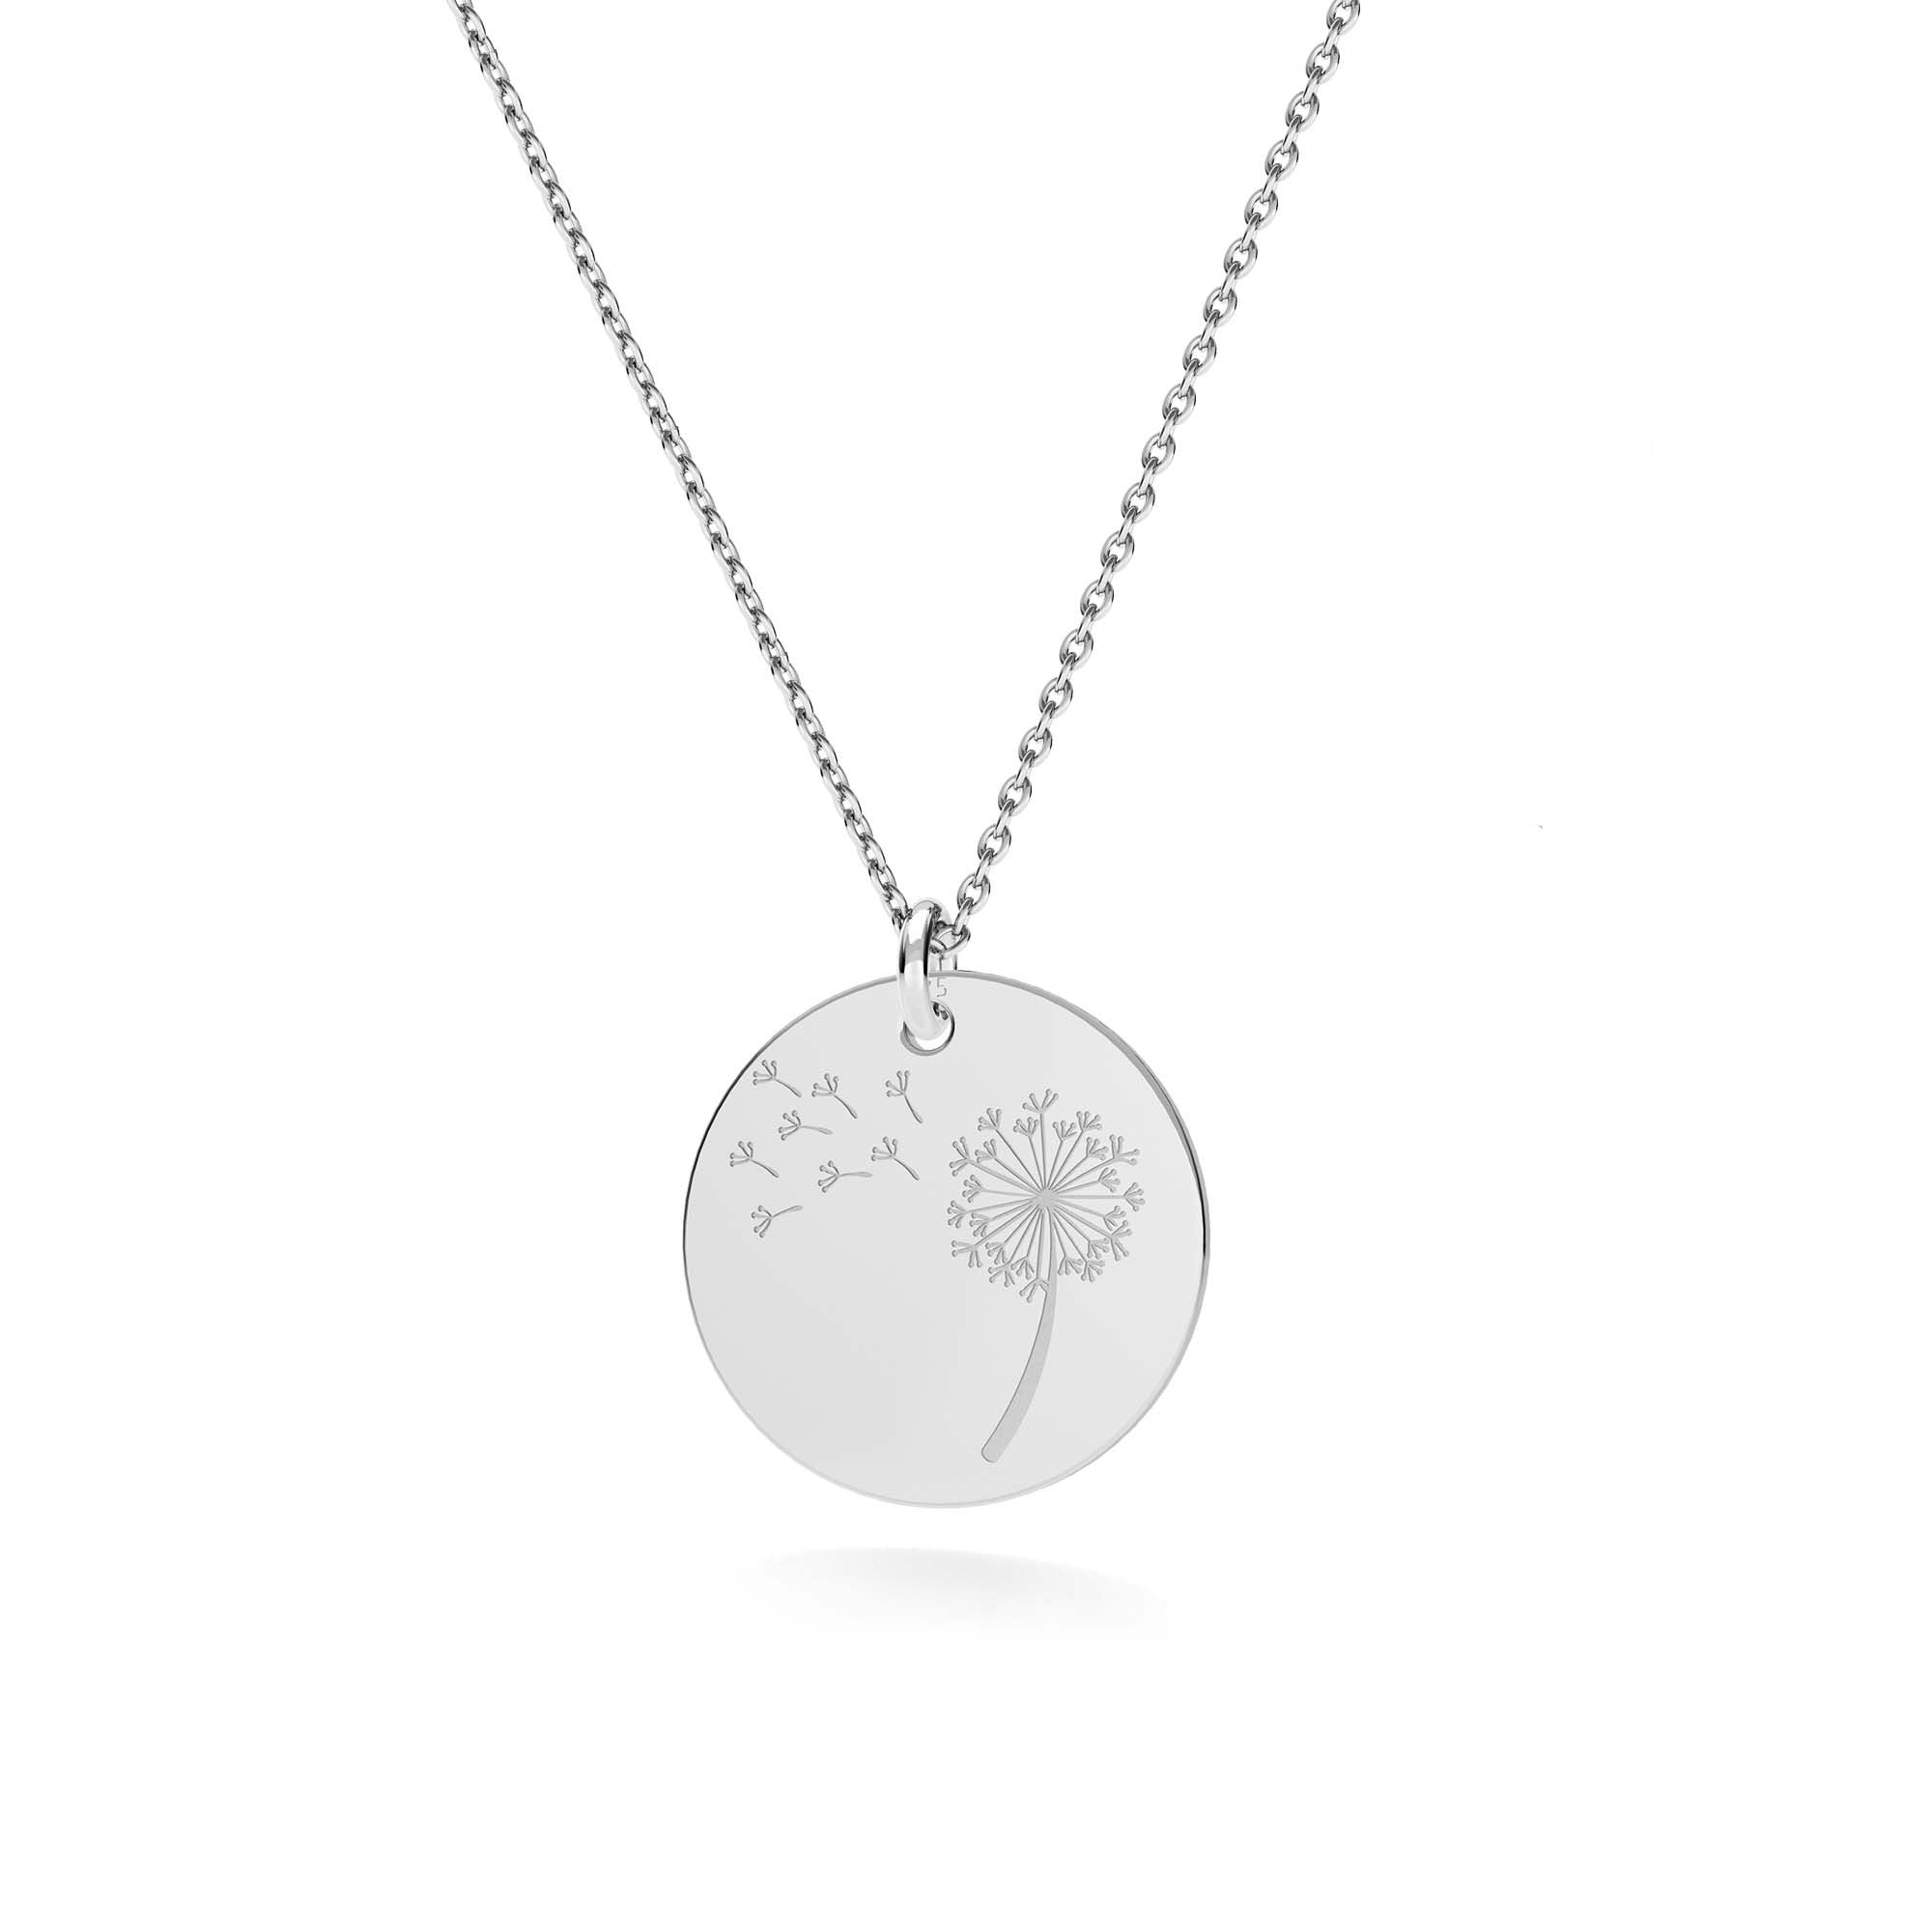 Make a wish - Dandelion Wish Silver Necklace, [product type], - Personalised Silver Jewellery Ireland by Magpie Gems